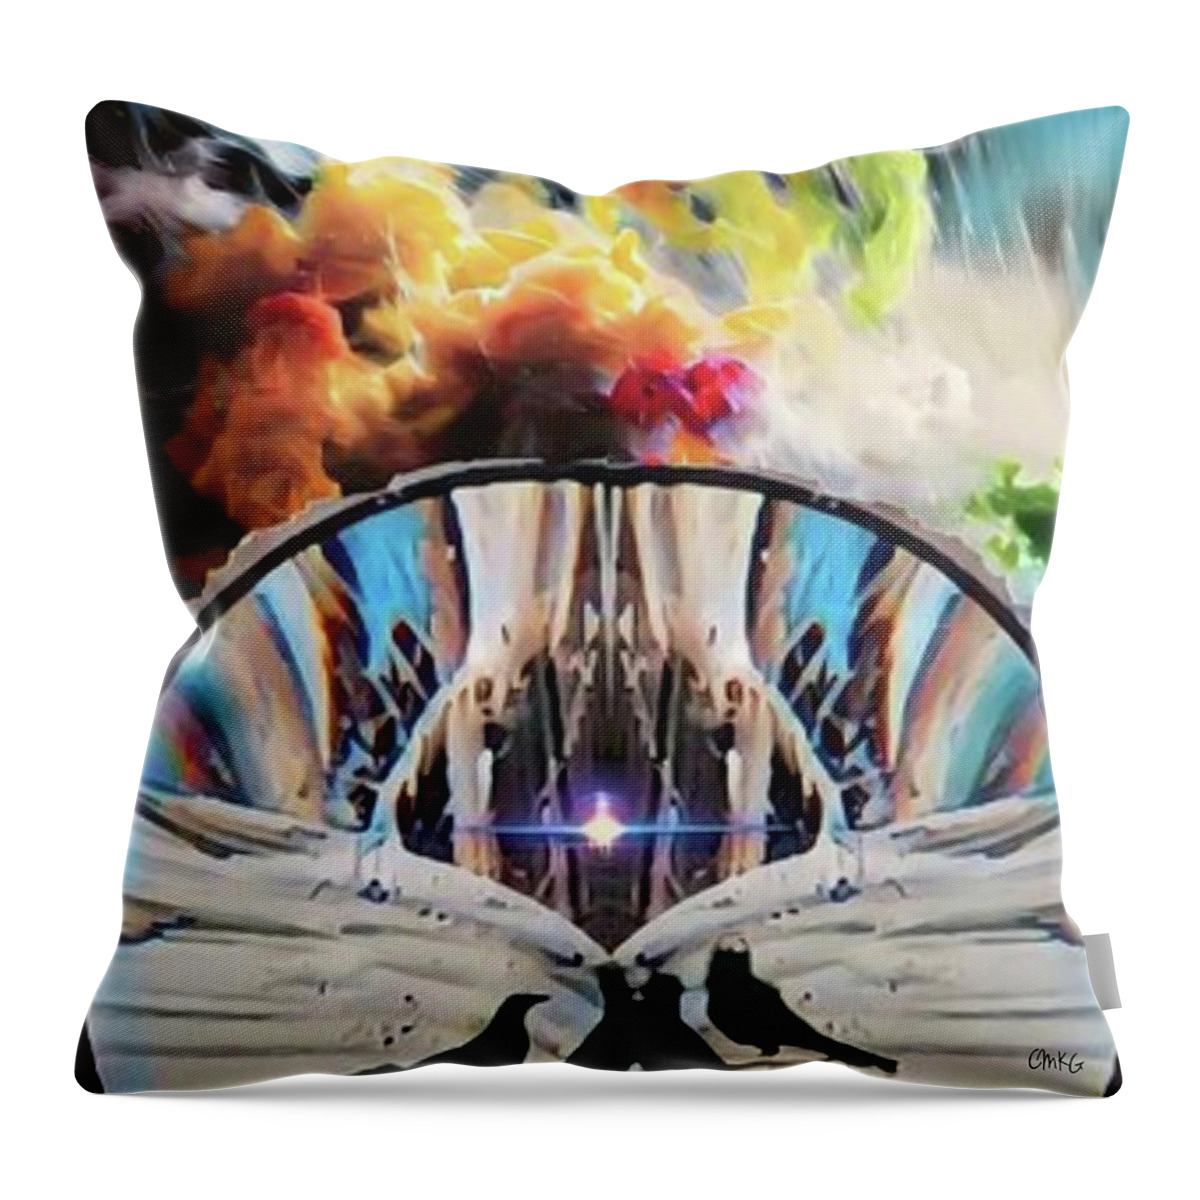  Throw Pillow featuring the digital art ExitentialBirdMeeting by Christina Knight